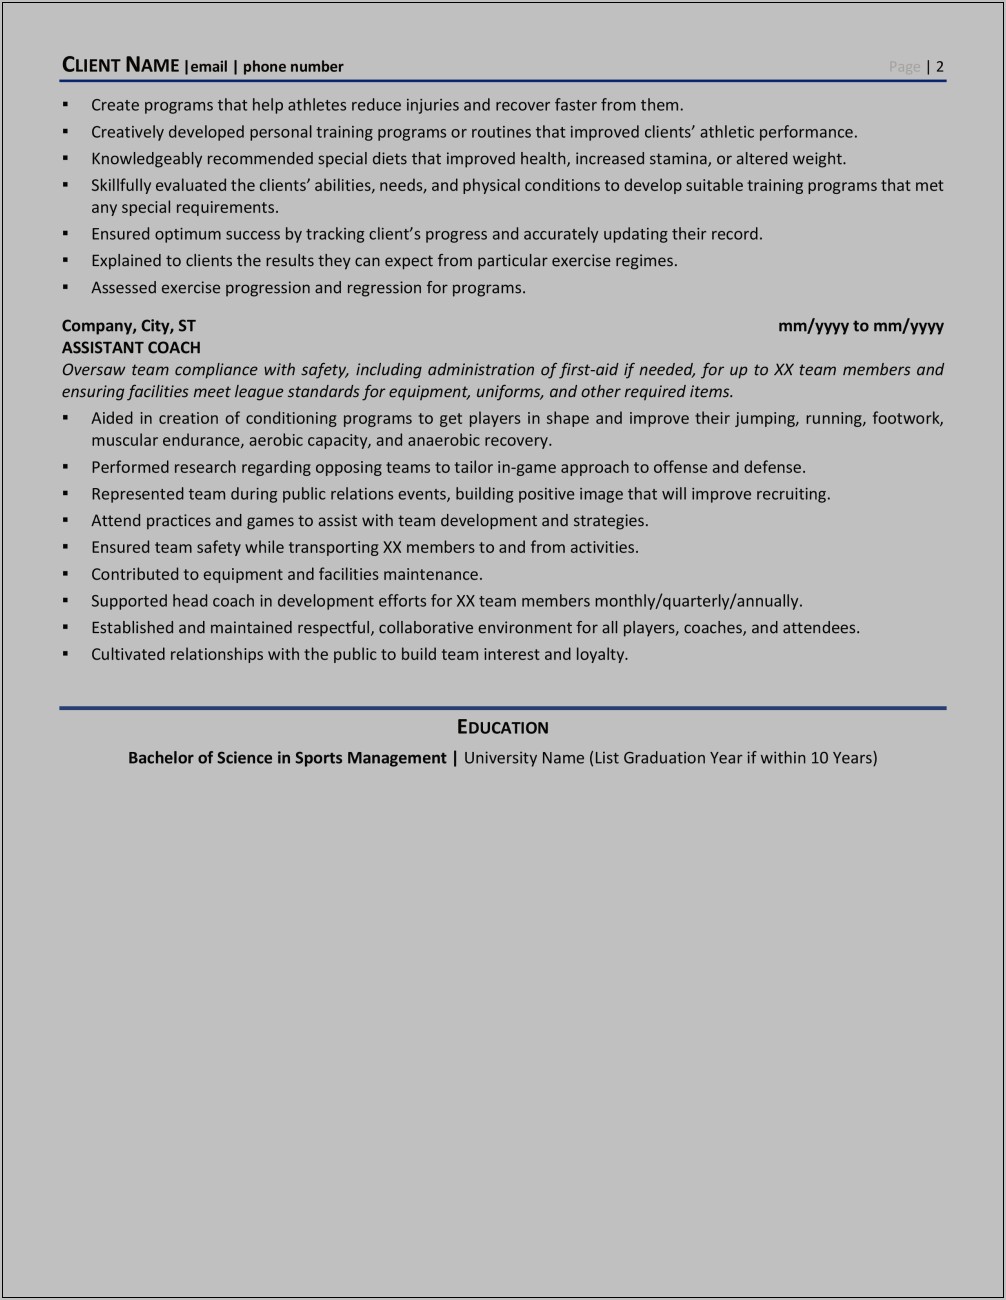 Resume Skills For A Trainer